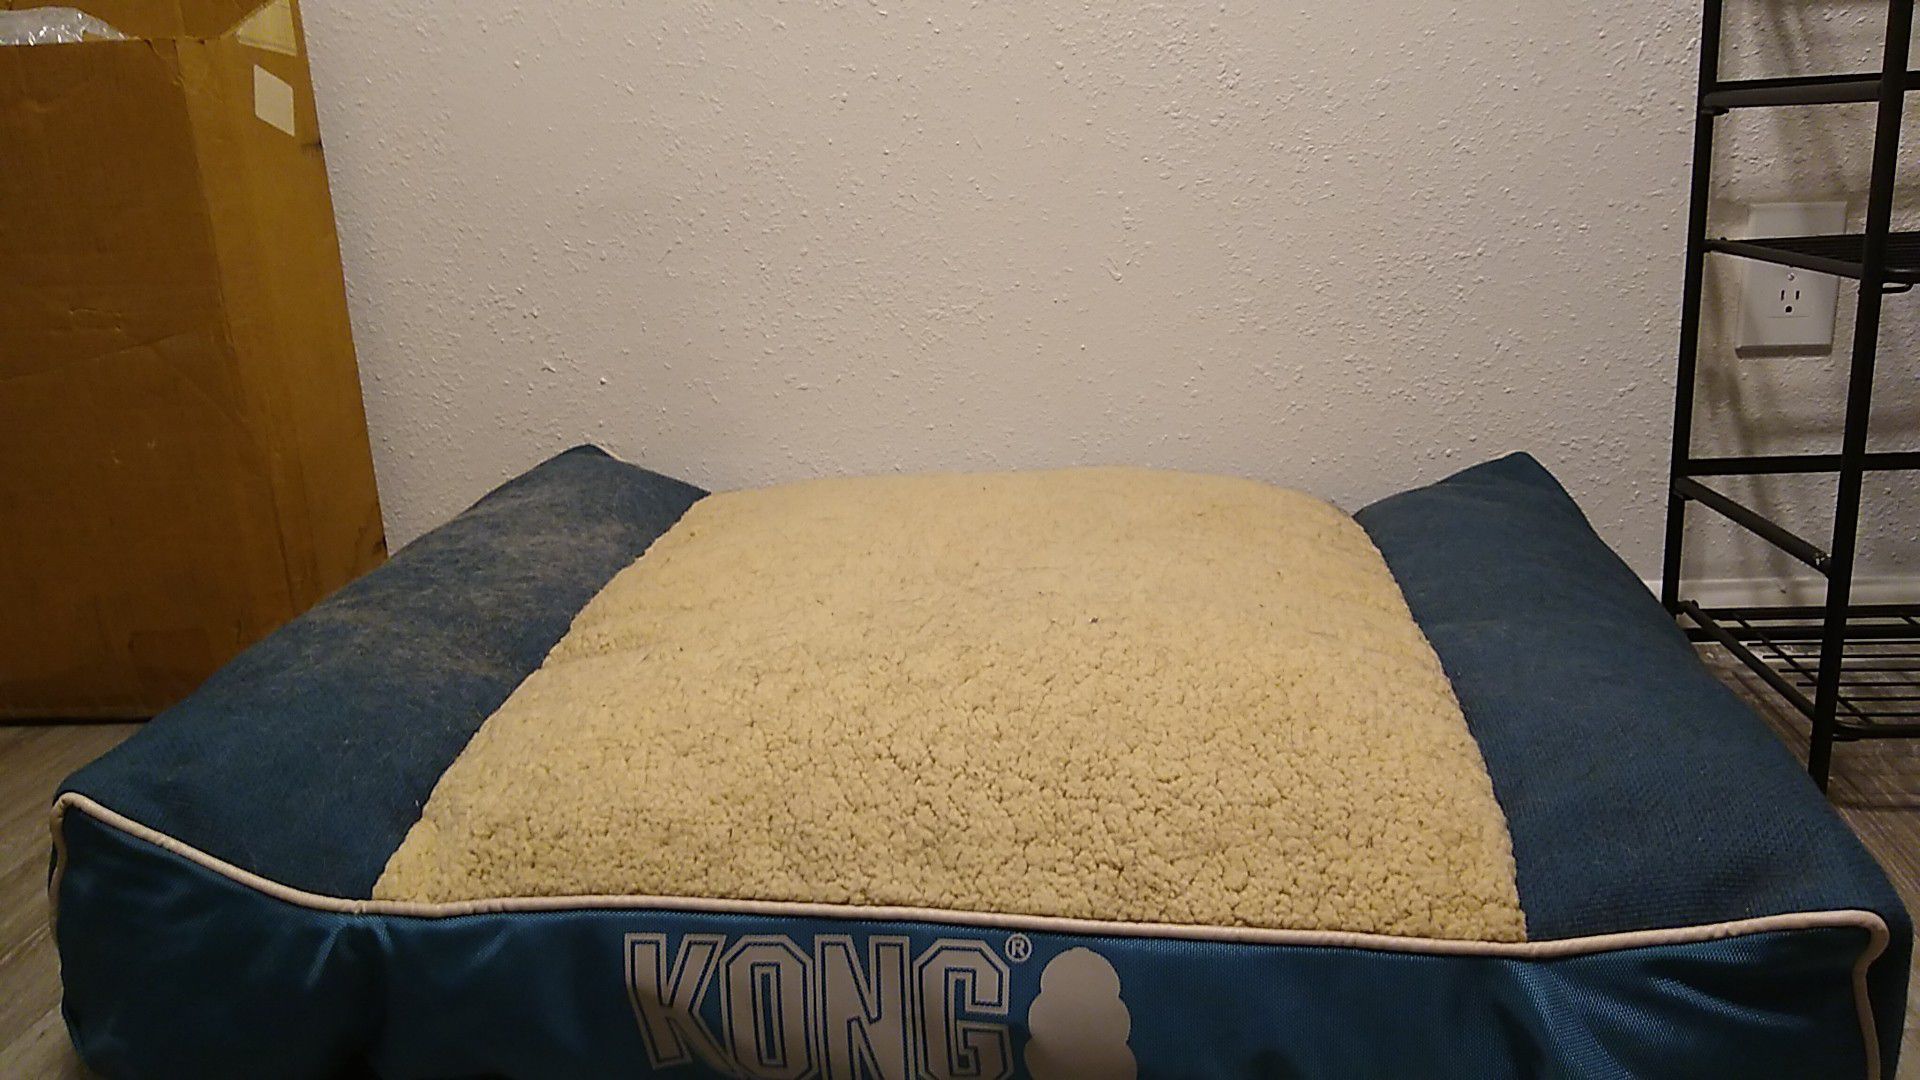 Kong bed, never used by dog, cat liked it, so it could use a vacume (I would but I don't own one)